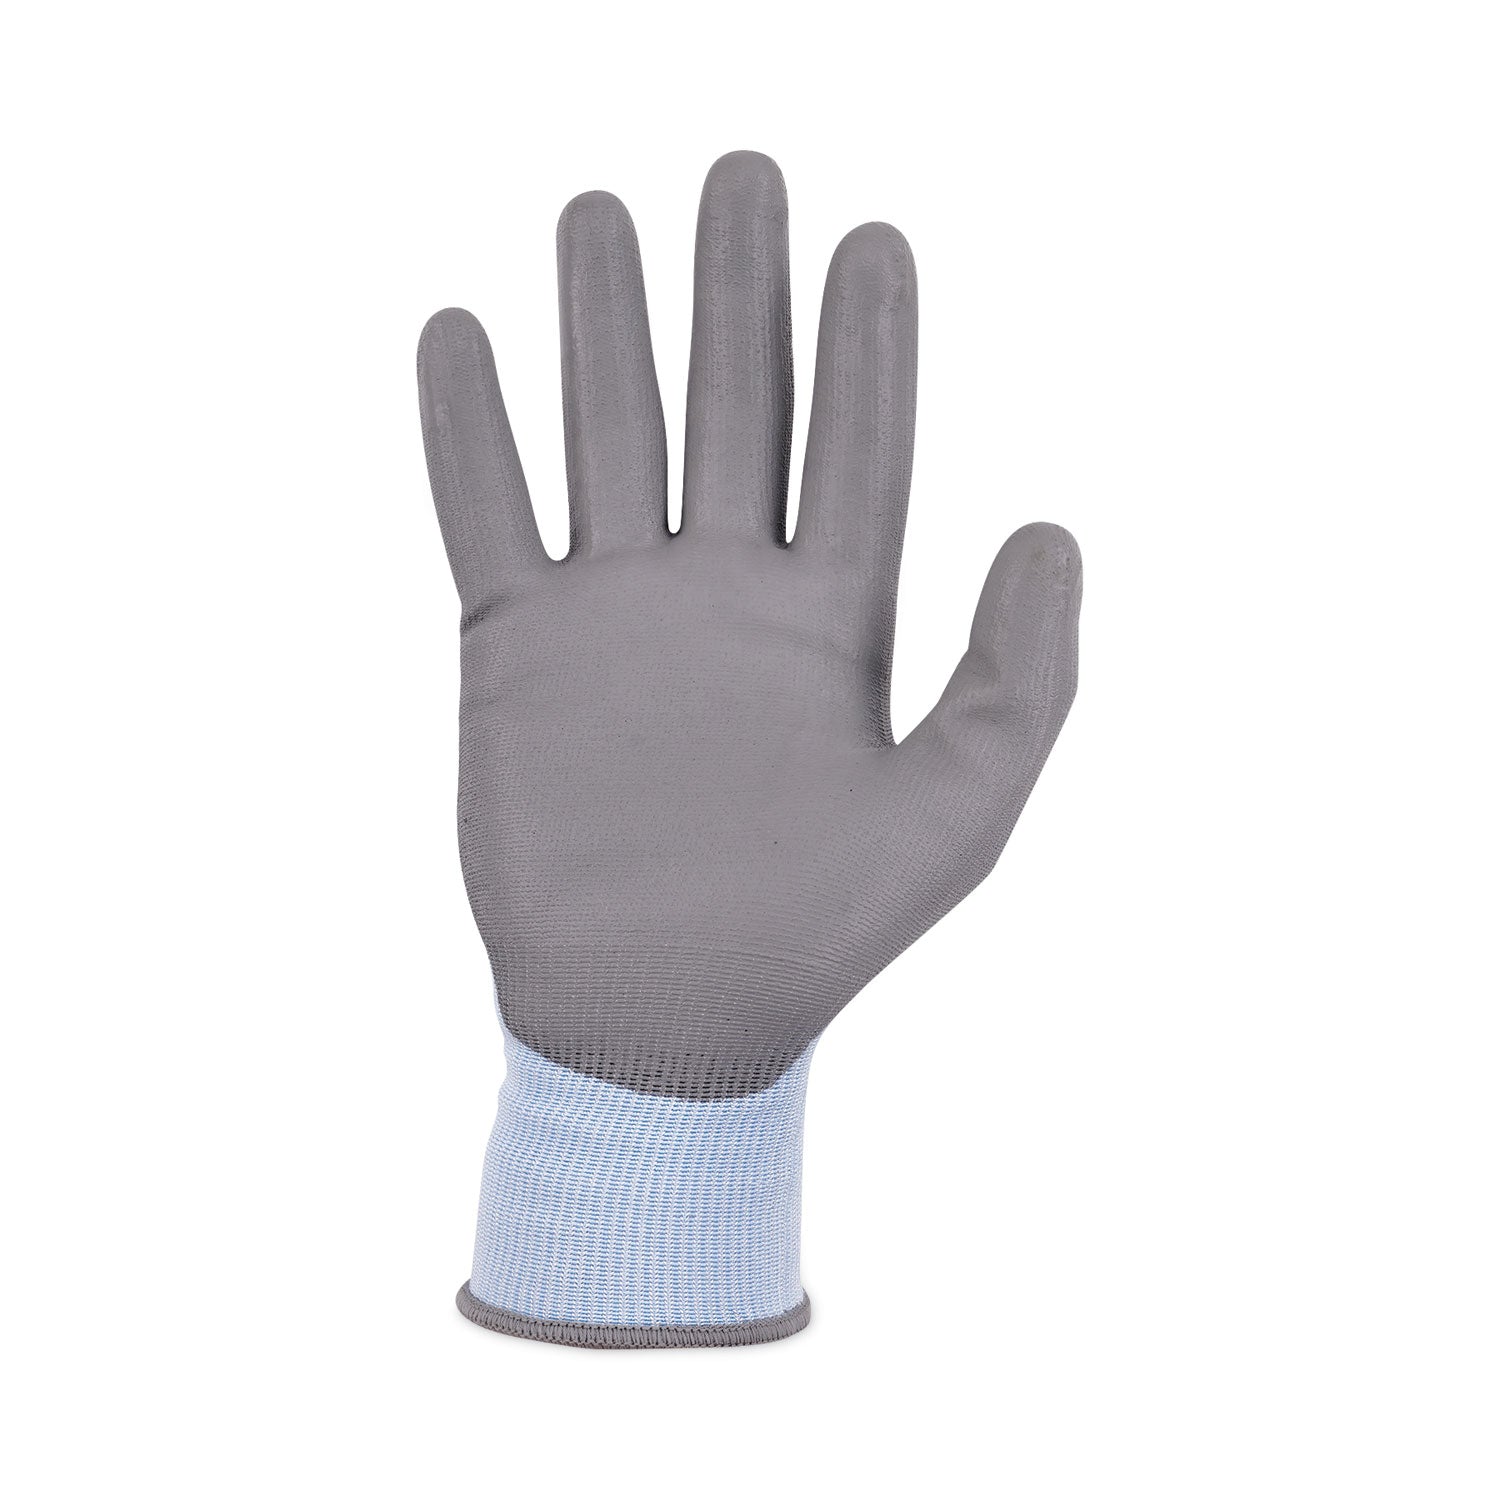 proflex-7025-ansi-a2-pu-coated-cr-gloves-blue-x-large-12-pairs-pack-ships-in-1-3-business-days_ego10425 - 2